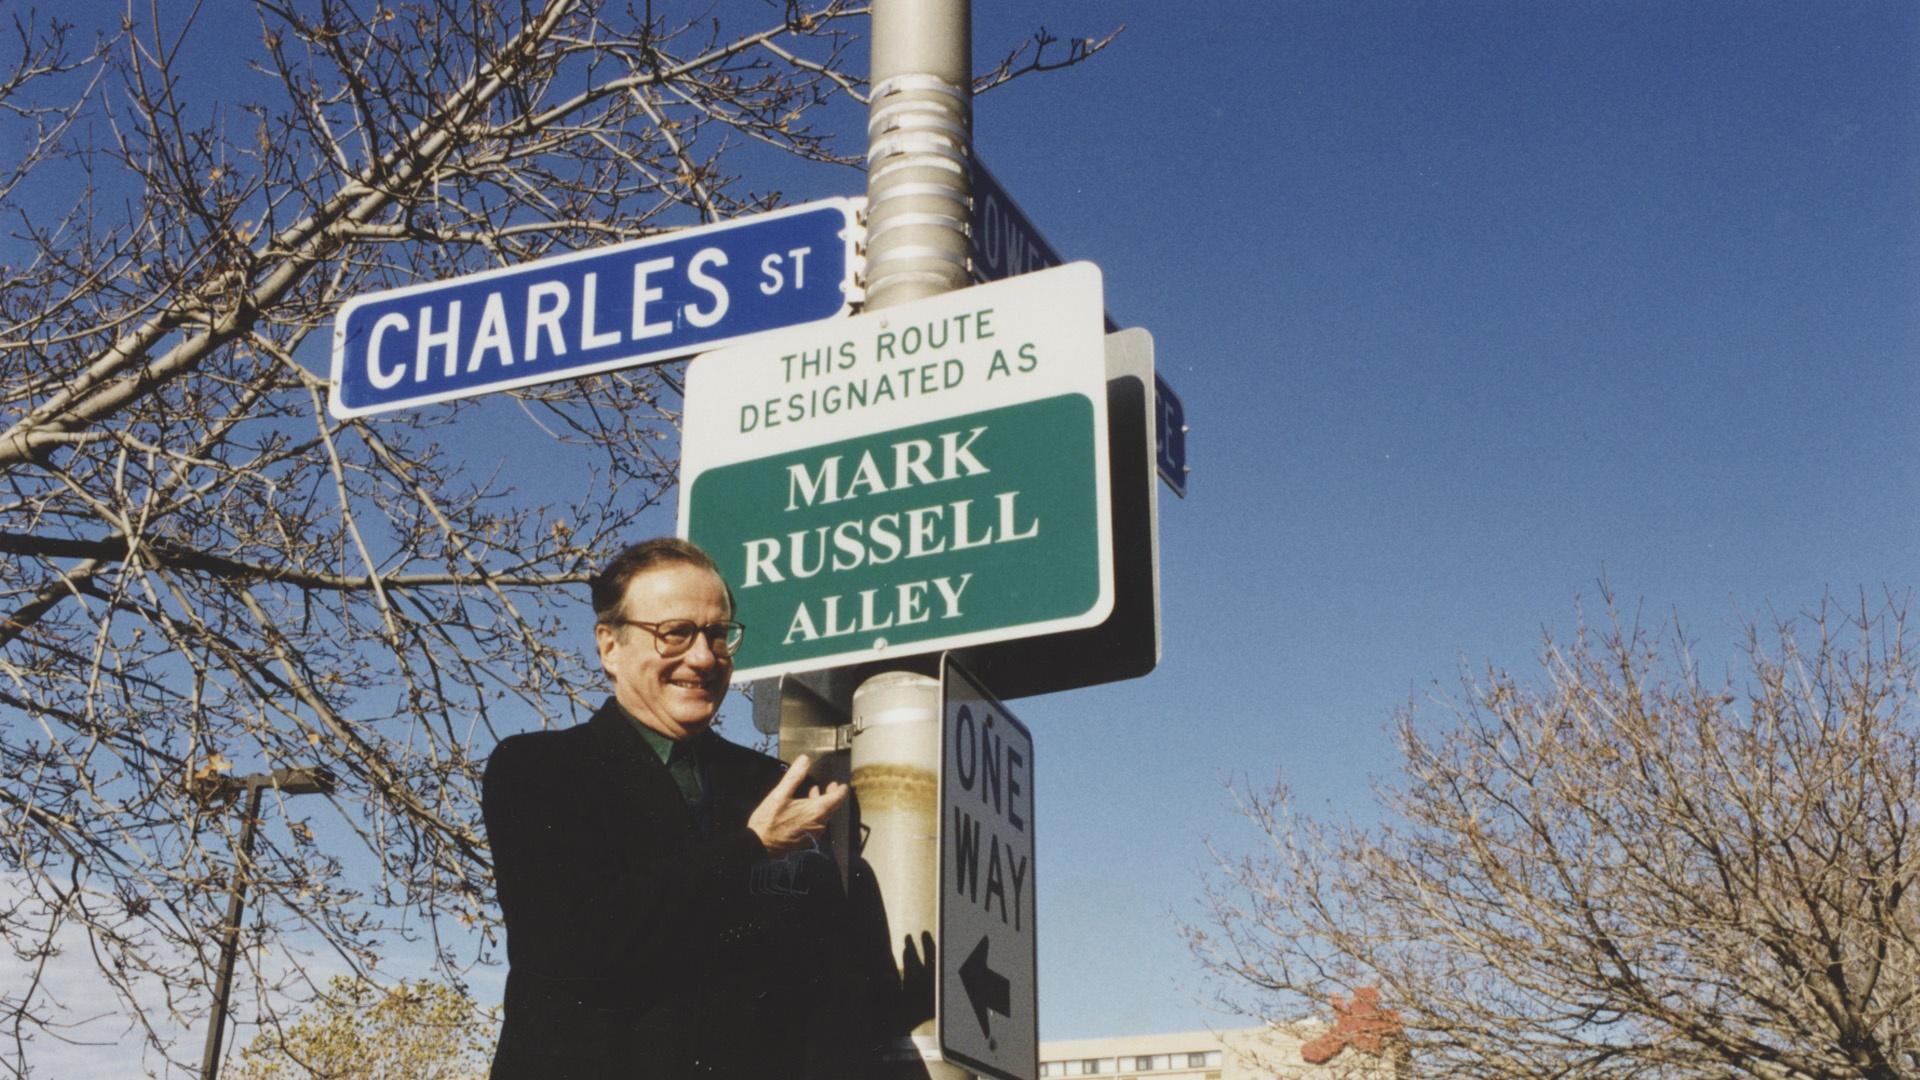 Mark Russell in fron t of sign designating Charles St. in Buffalo as "Mark Russell Alley"